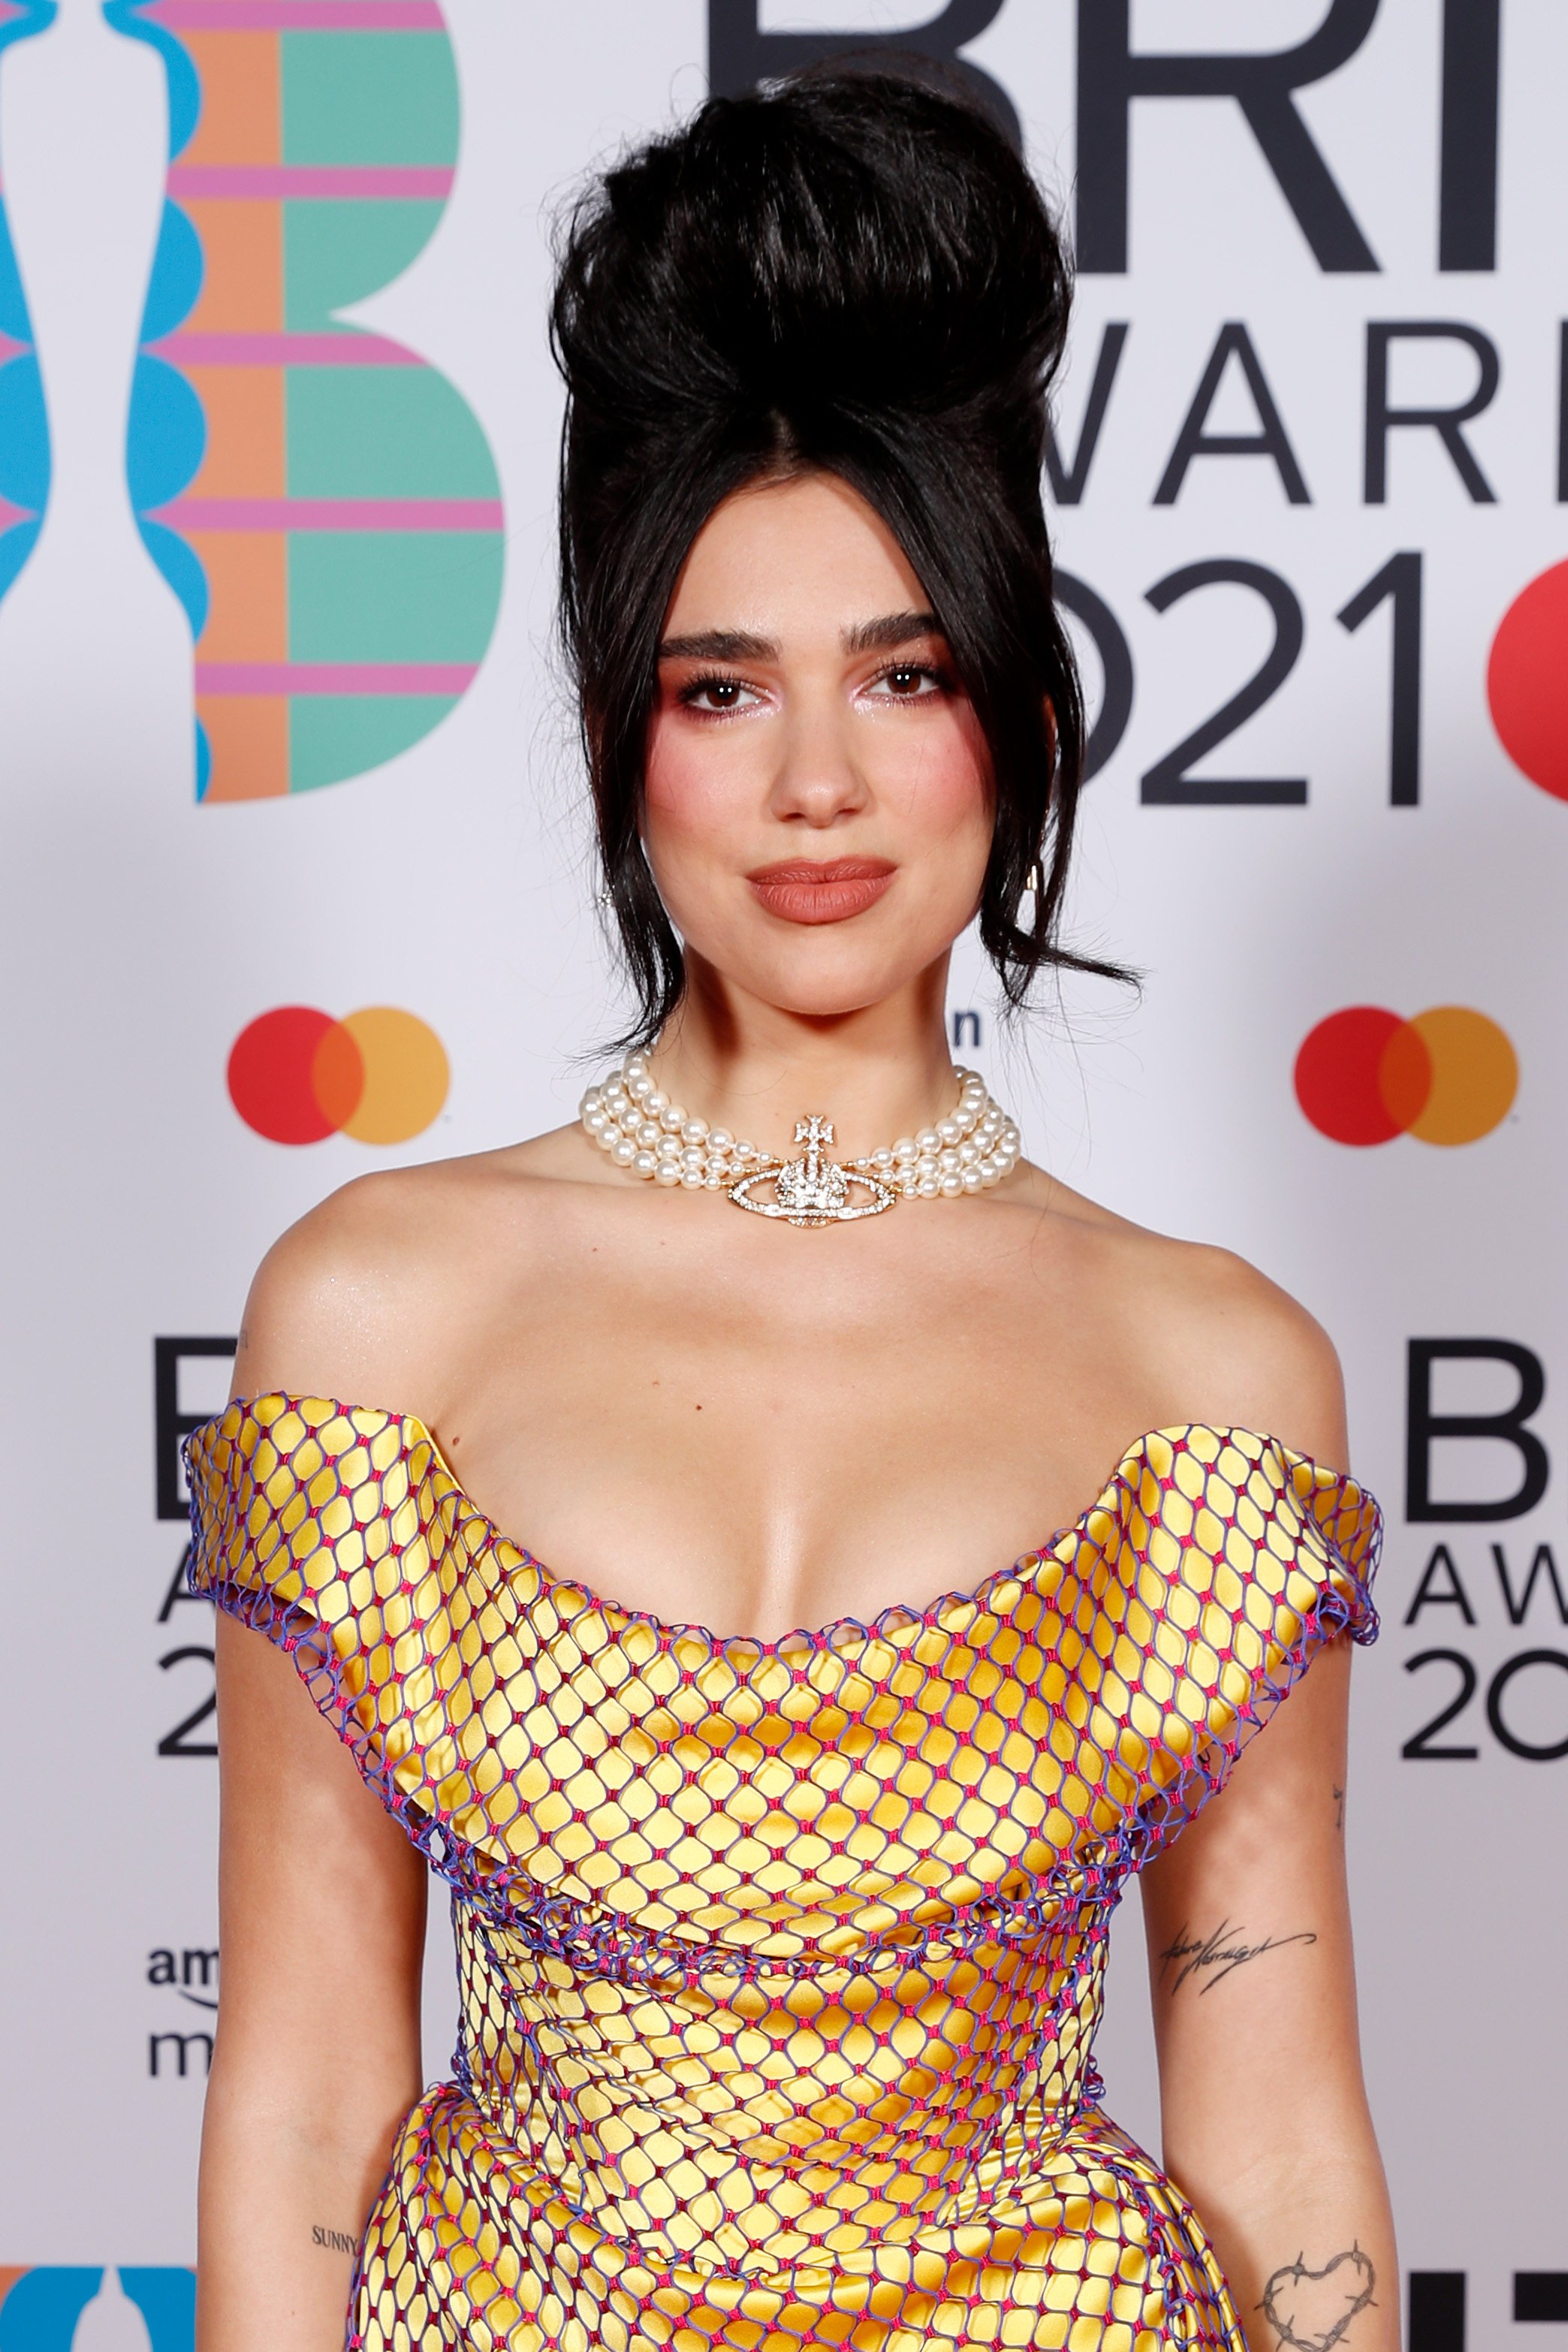 Dua Lipa poses in the media room during The BRIT Awards 2021 at The O2 Arena on May 11, 2021 in London, England.  She’s wearing a Vivienne Westwood necklace. Photo: Brit Awards/Getty Images